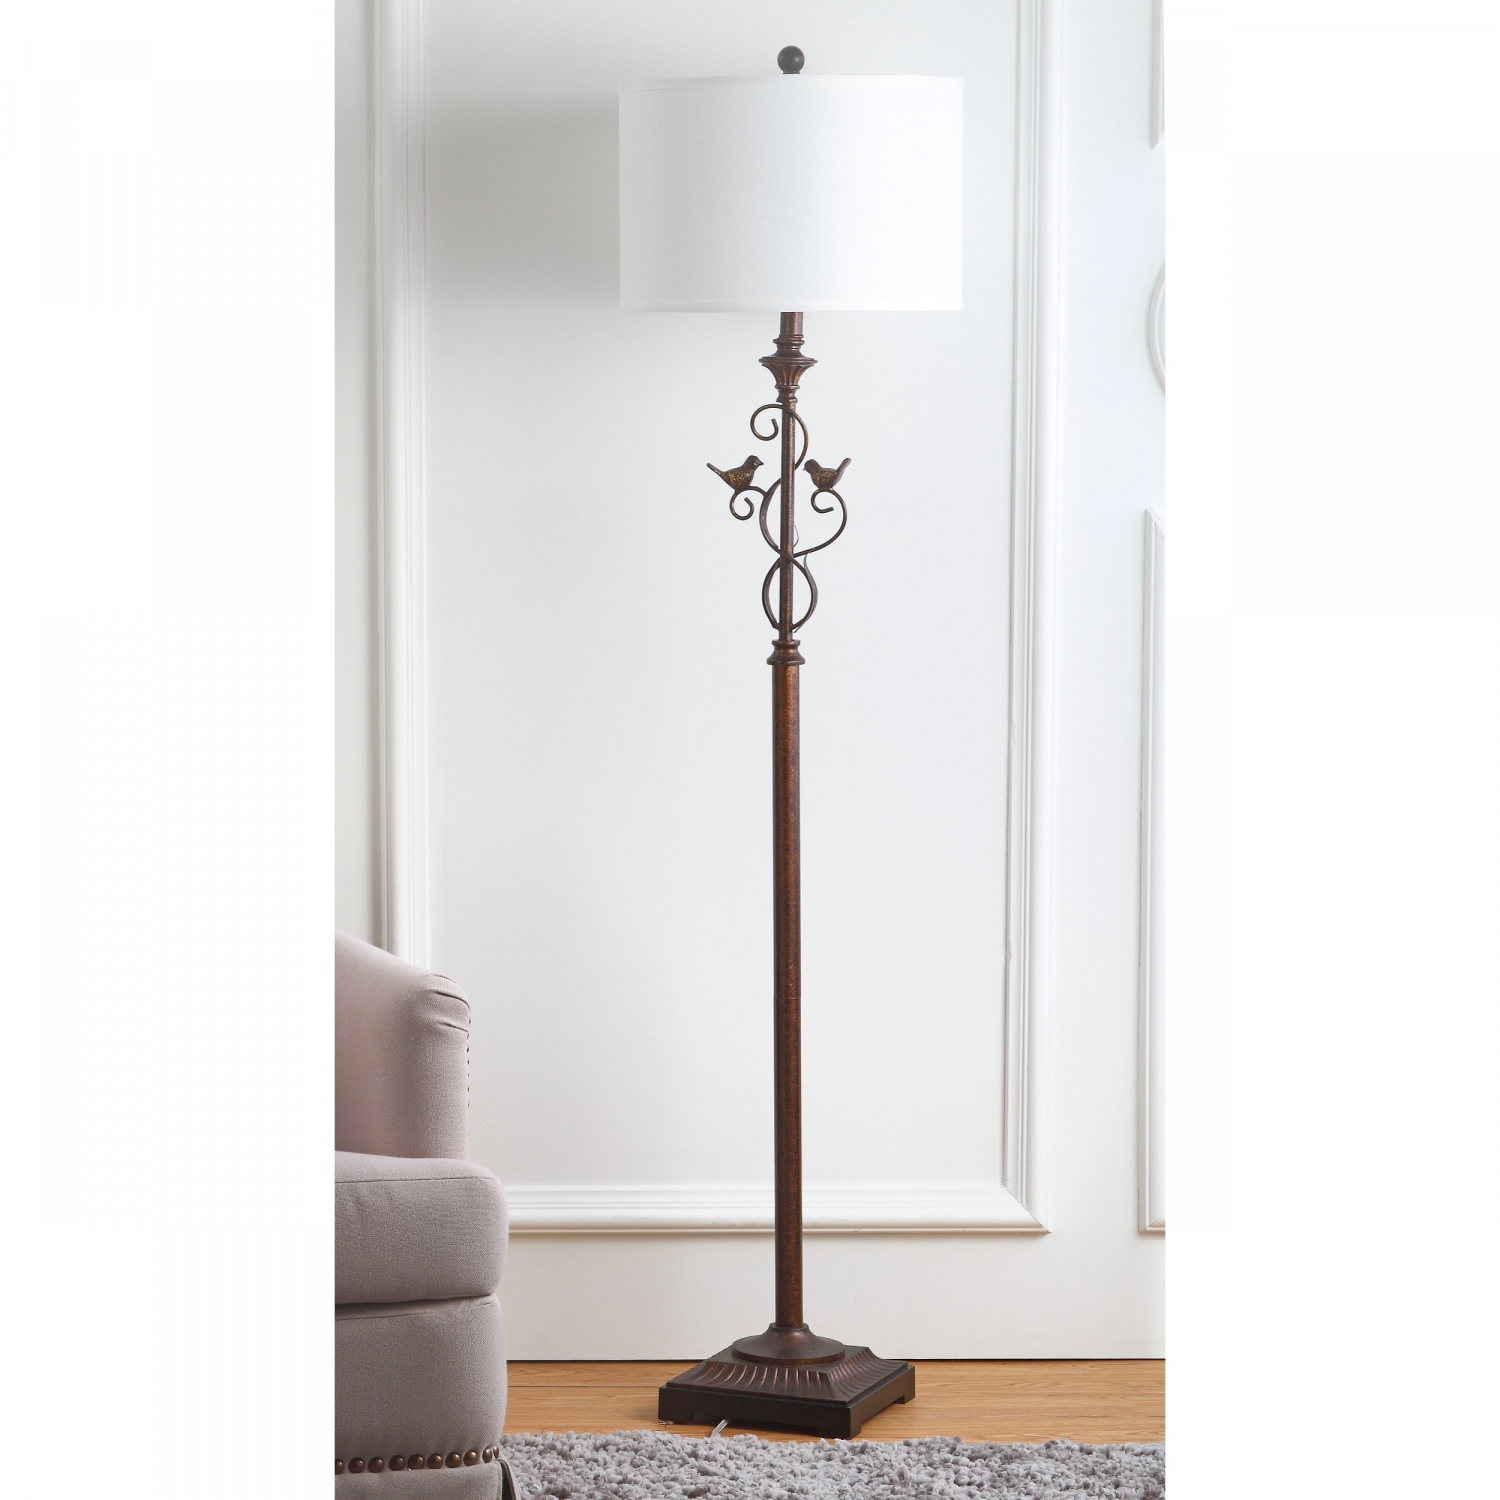 Details About Safavieh Lighting 61 Inch Birdsong Oil Rubbed Bronze Floor Lamp for proportions 1500 X 1500